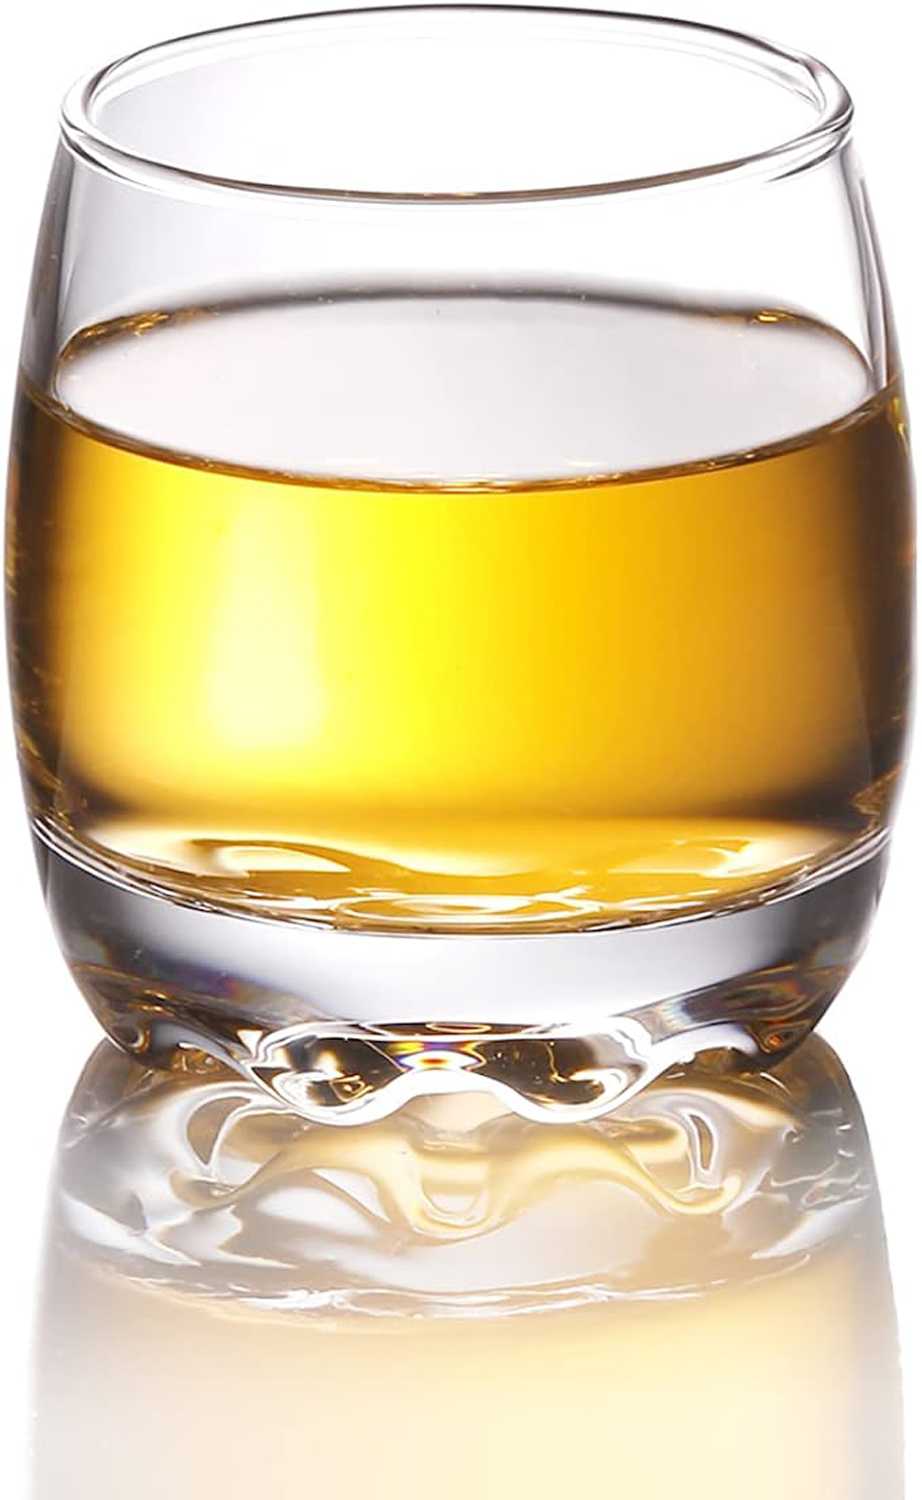 Rounded shot glass with whiskey